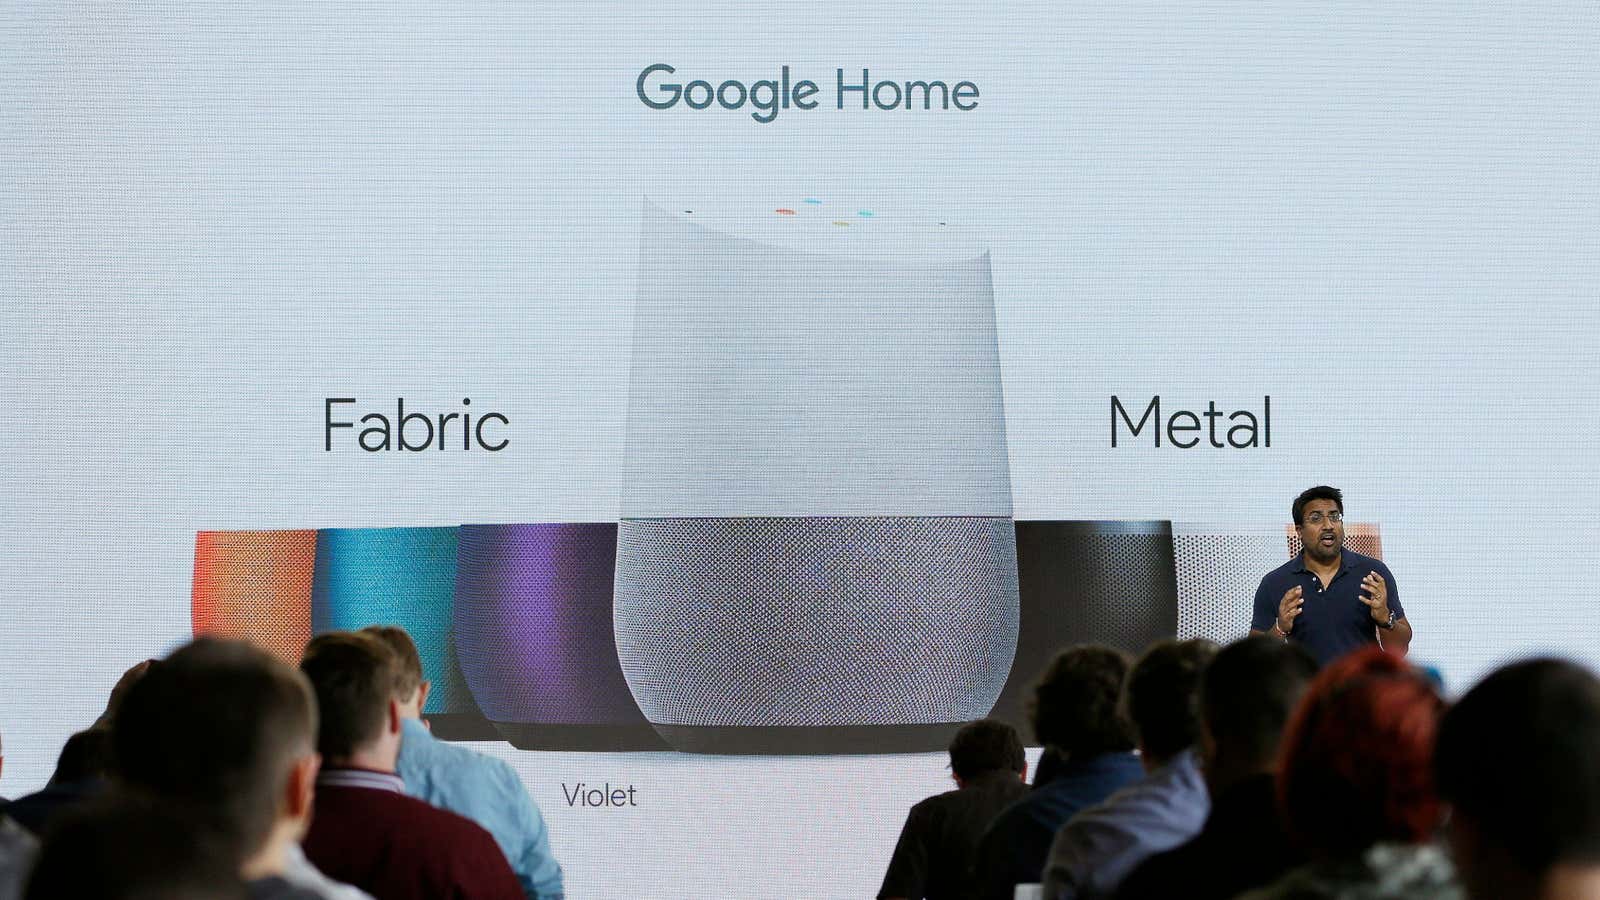 The Google Home can apparently dress for any occasion.